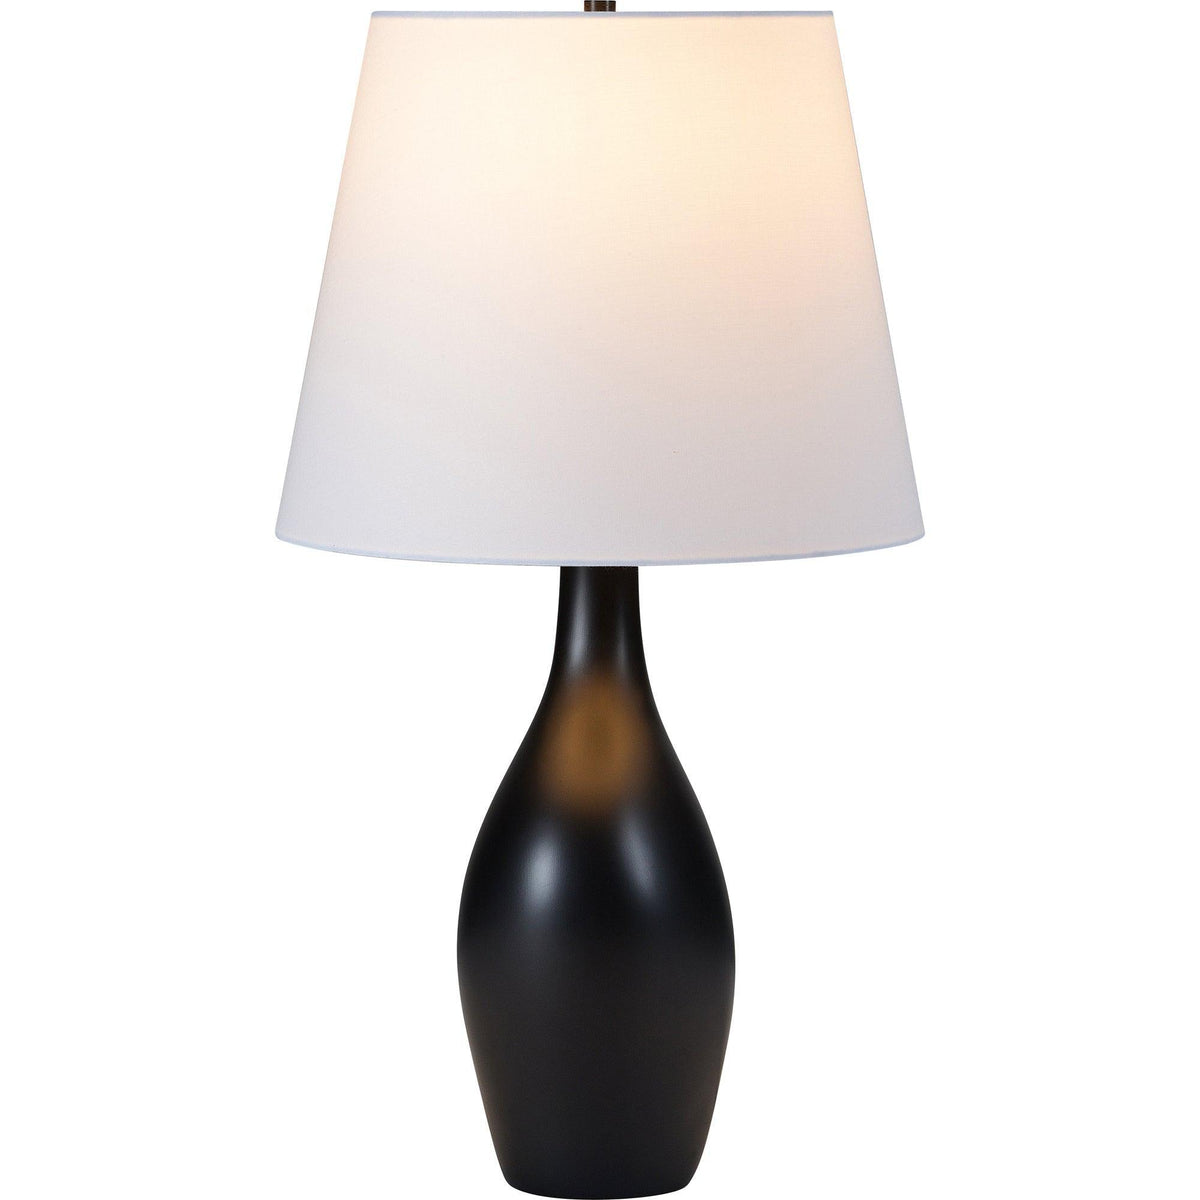 Renwil - Canberra Table Lamp - LPT1190 | Montreal Lighting & Hardware